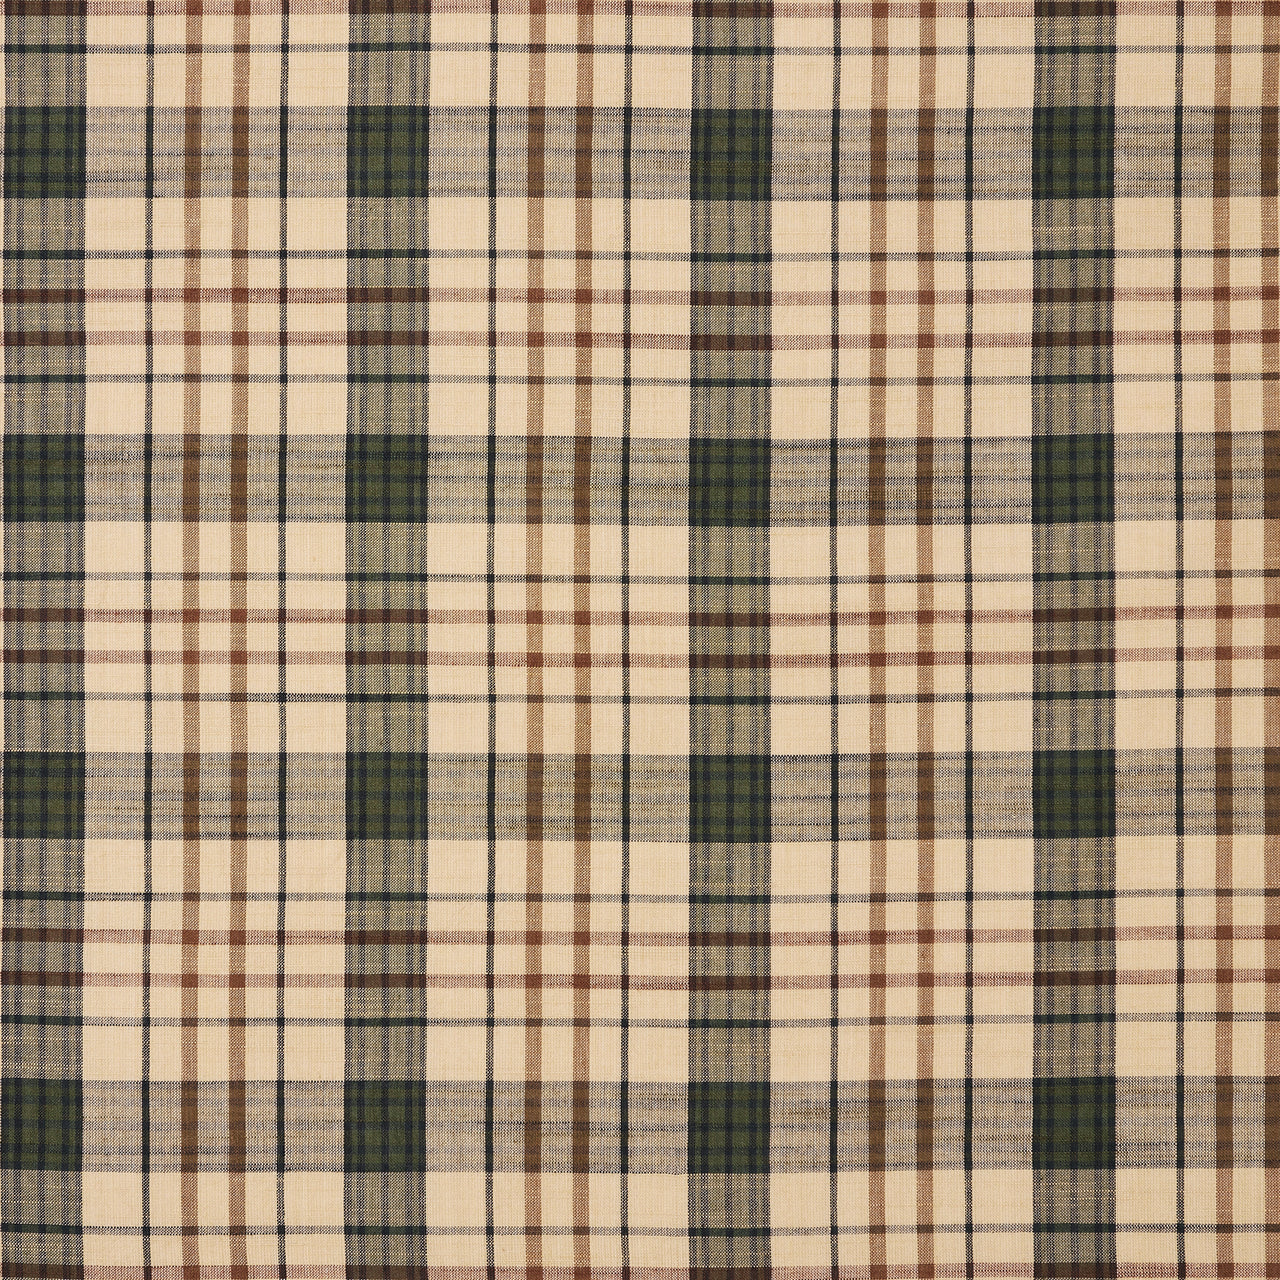 Cider Mill Plaid Tier Set of 2 L24xW36 VHC Brands